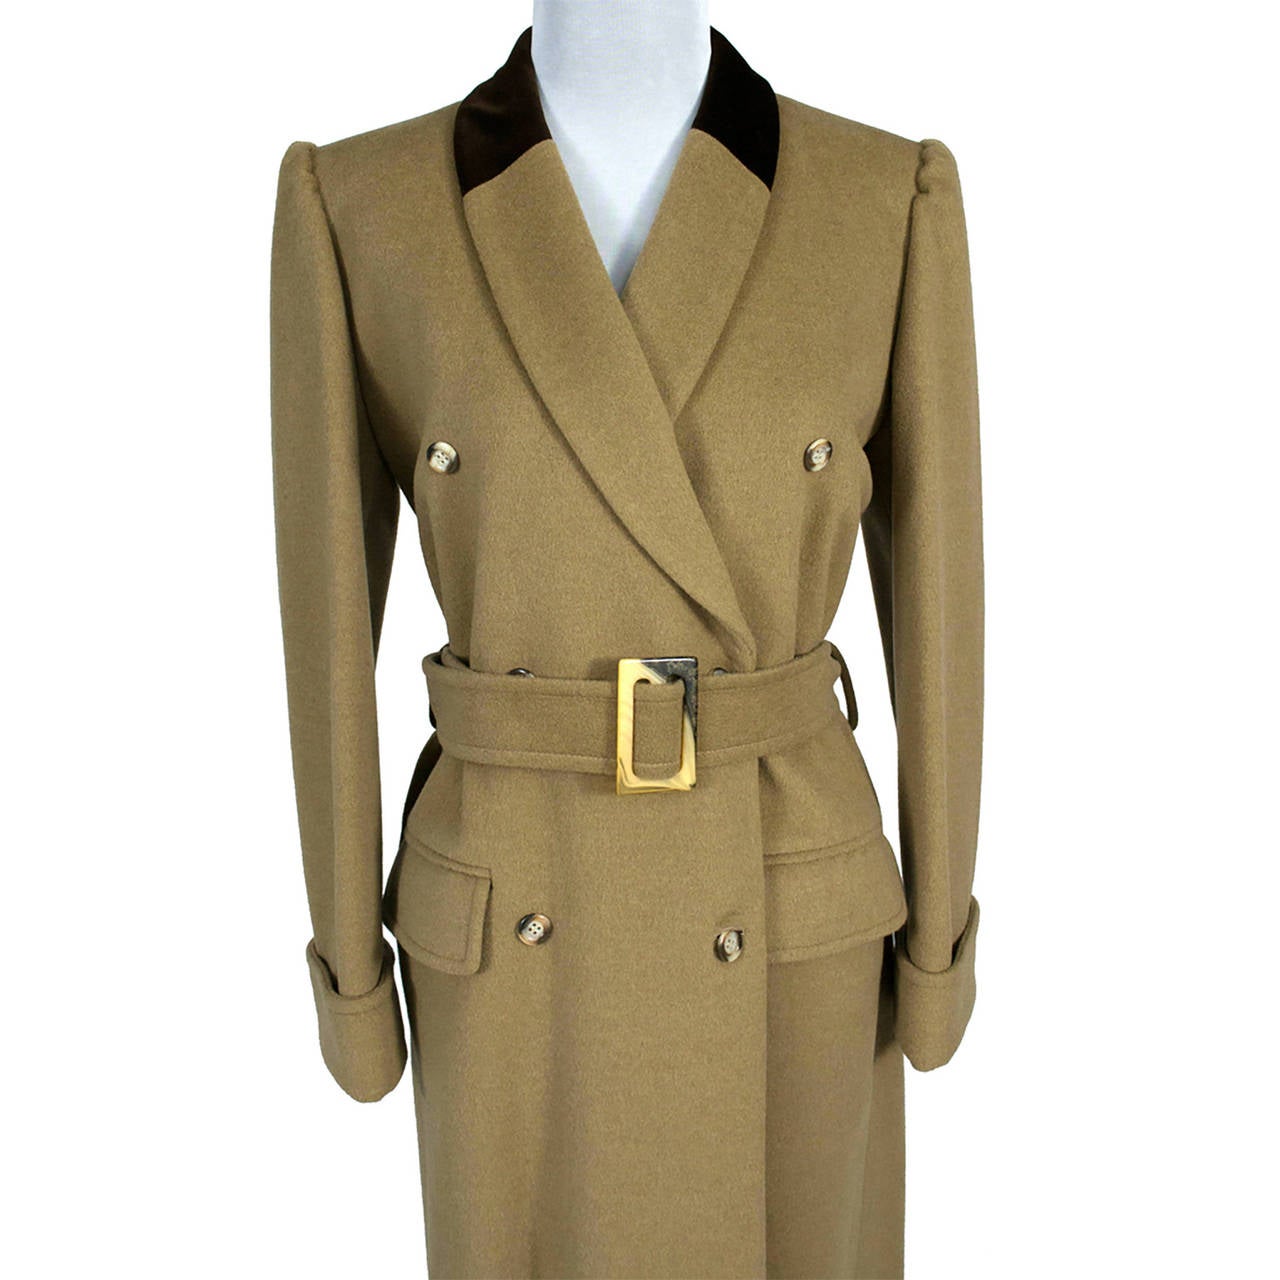 A timeless classic Valentino designer vintage coat! Outstanding camel colored vintage coat from Valentino, made in Italy in the 1970s. This coat has rarely if ever been worn and has pristine lining and is in excellent condition. There are front